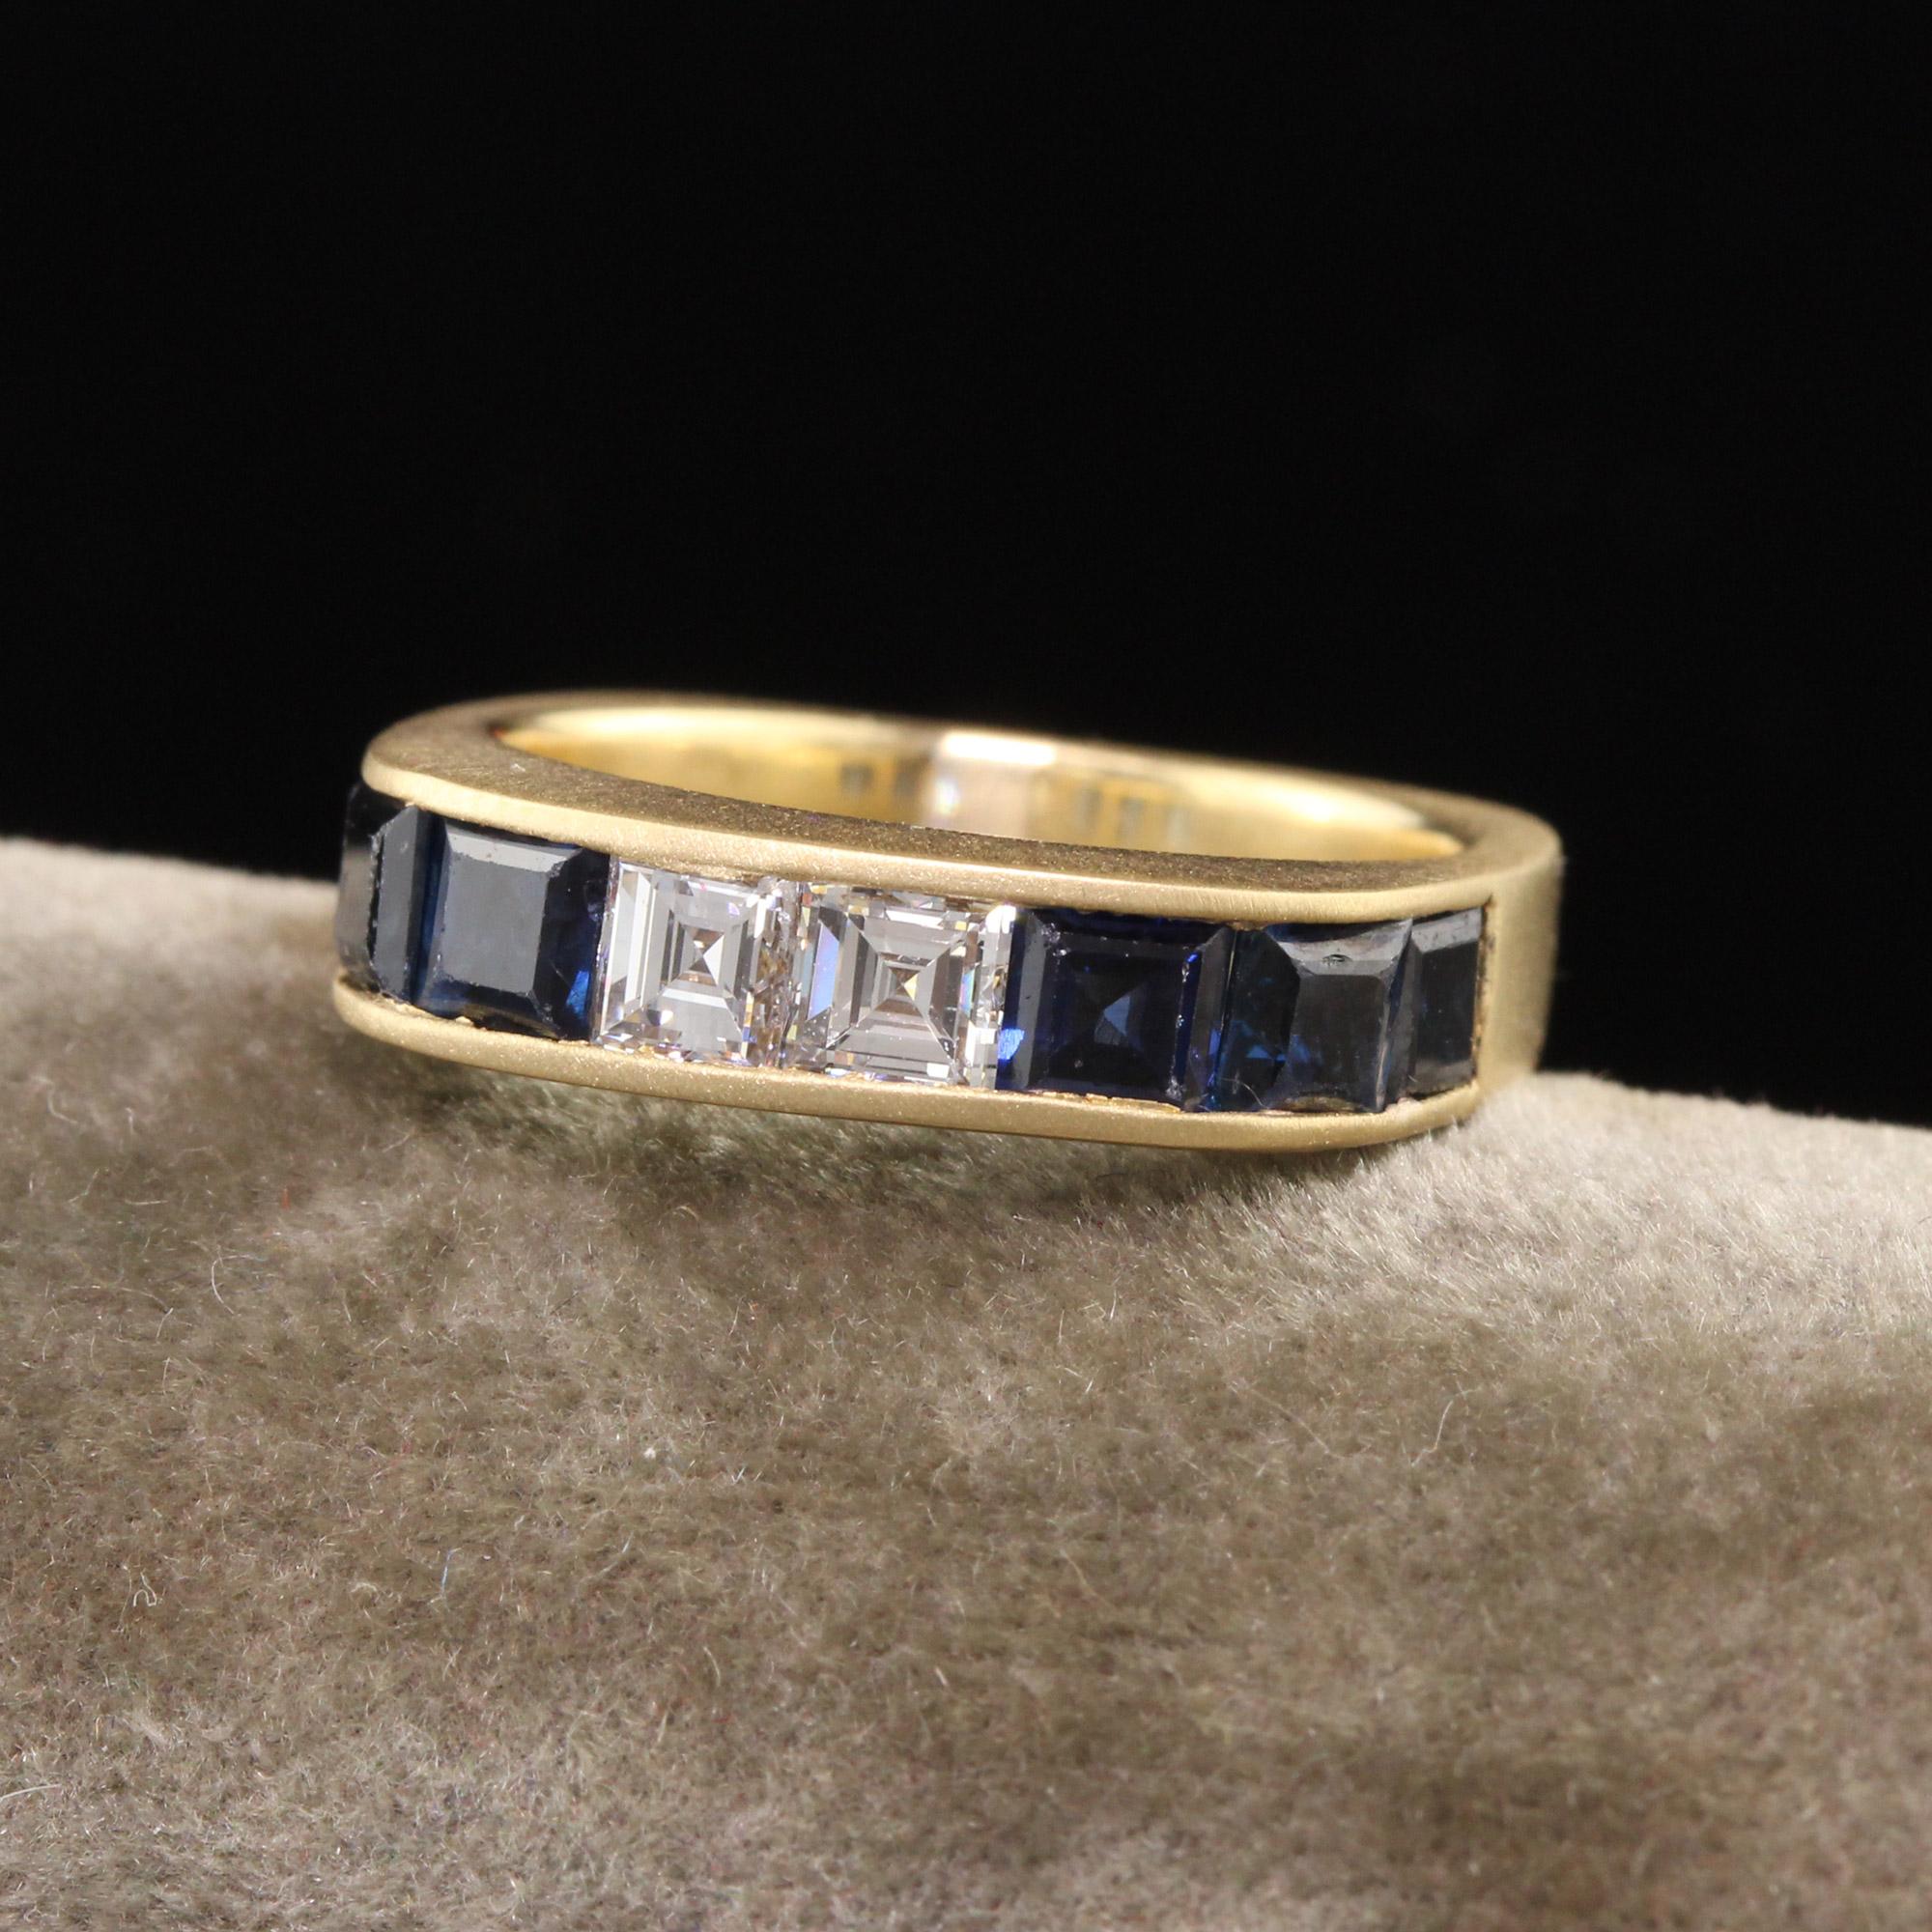 Beautiful Vintage Estate Retro18K Yellow Gold Carre Cut Diamond and Sapphire Band. This beautiful vintage ring has two white carre cut diamonds in the center with natural sapphires on the left and right of them set in 18k yellow gold.

Item